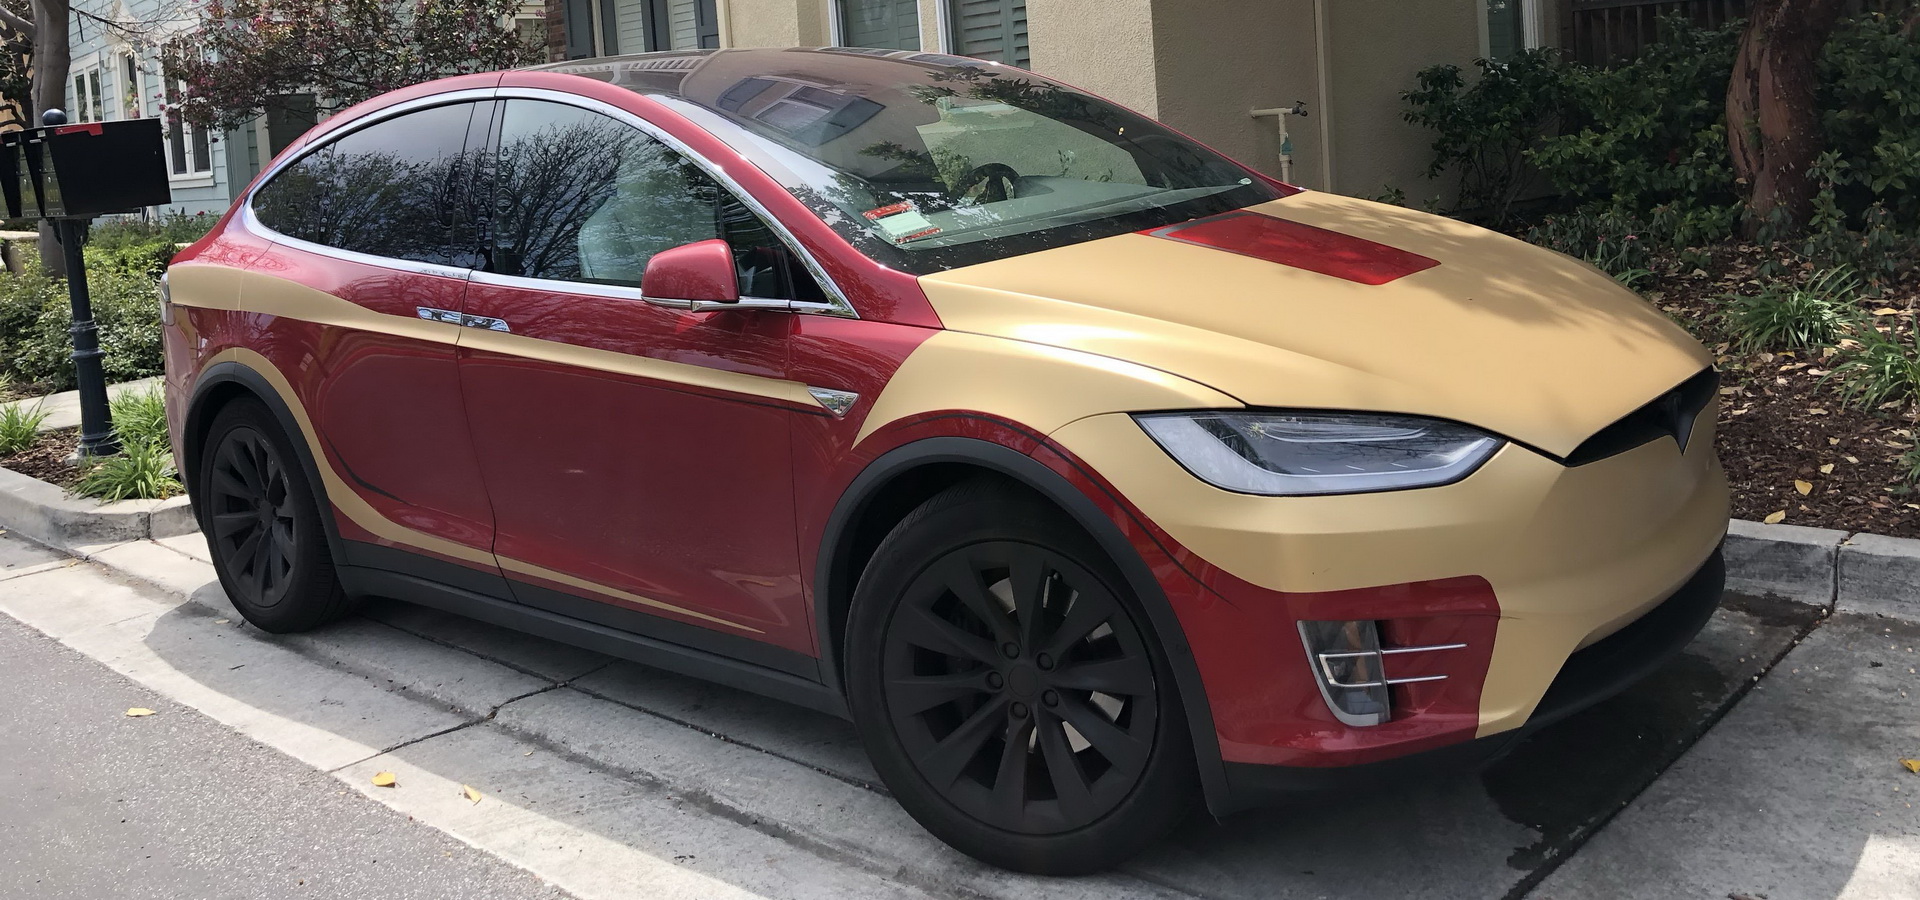 Are Iron Man Teslas A Thing It Kind Of Seems That Way   Carscoops